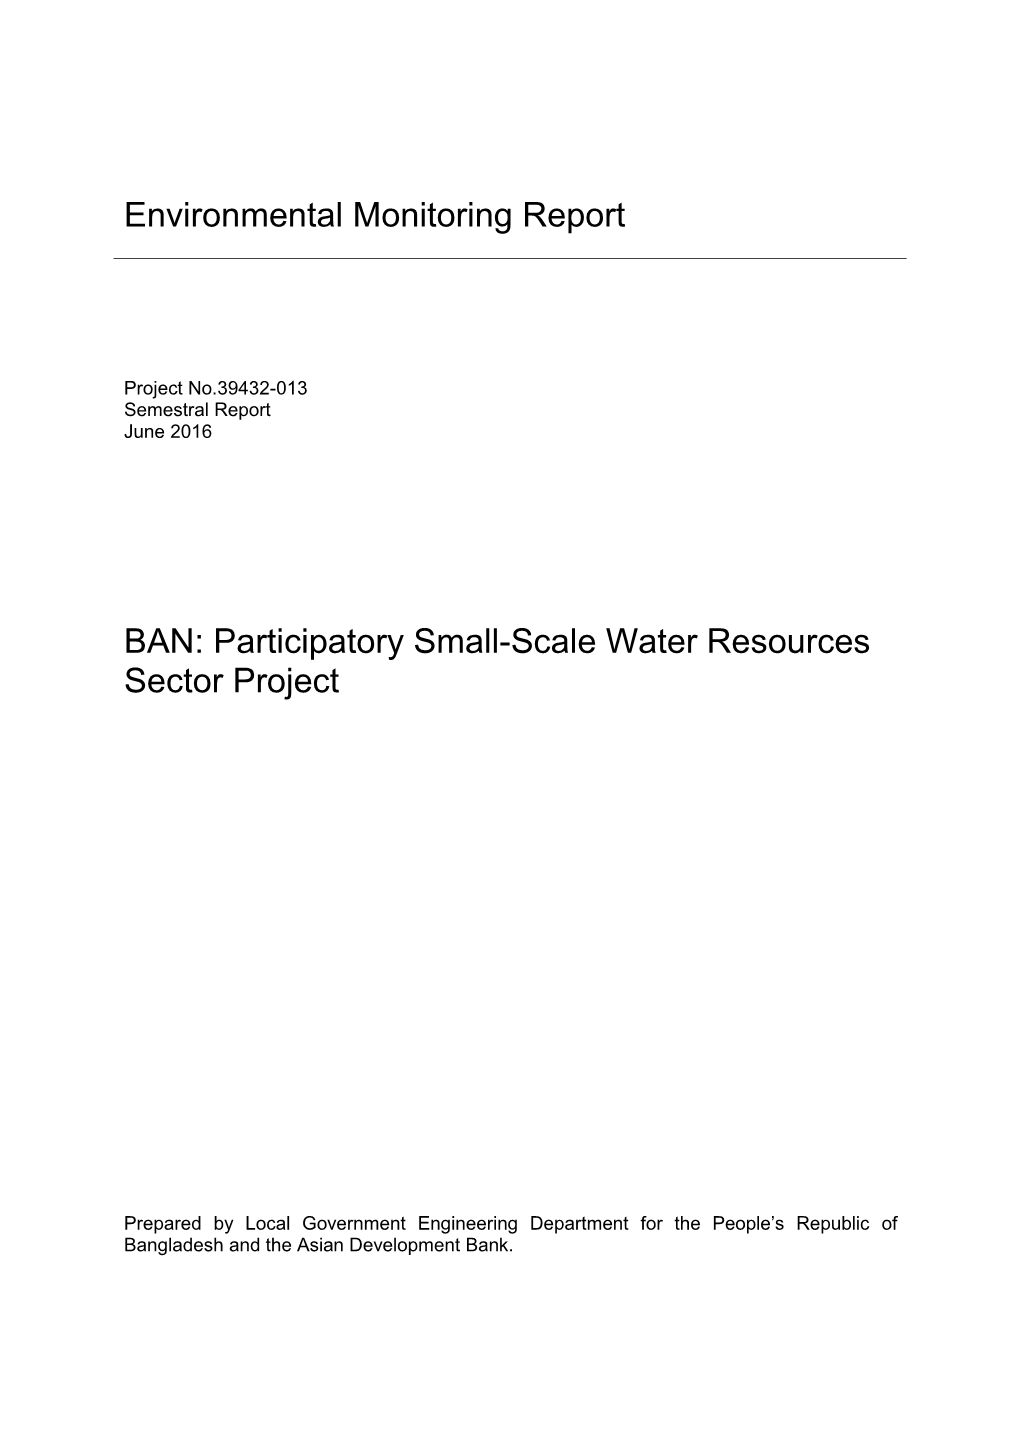 Participatory Small-Scale Water Resources Sector Project